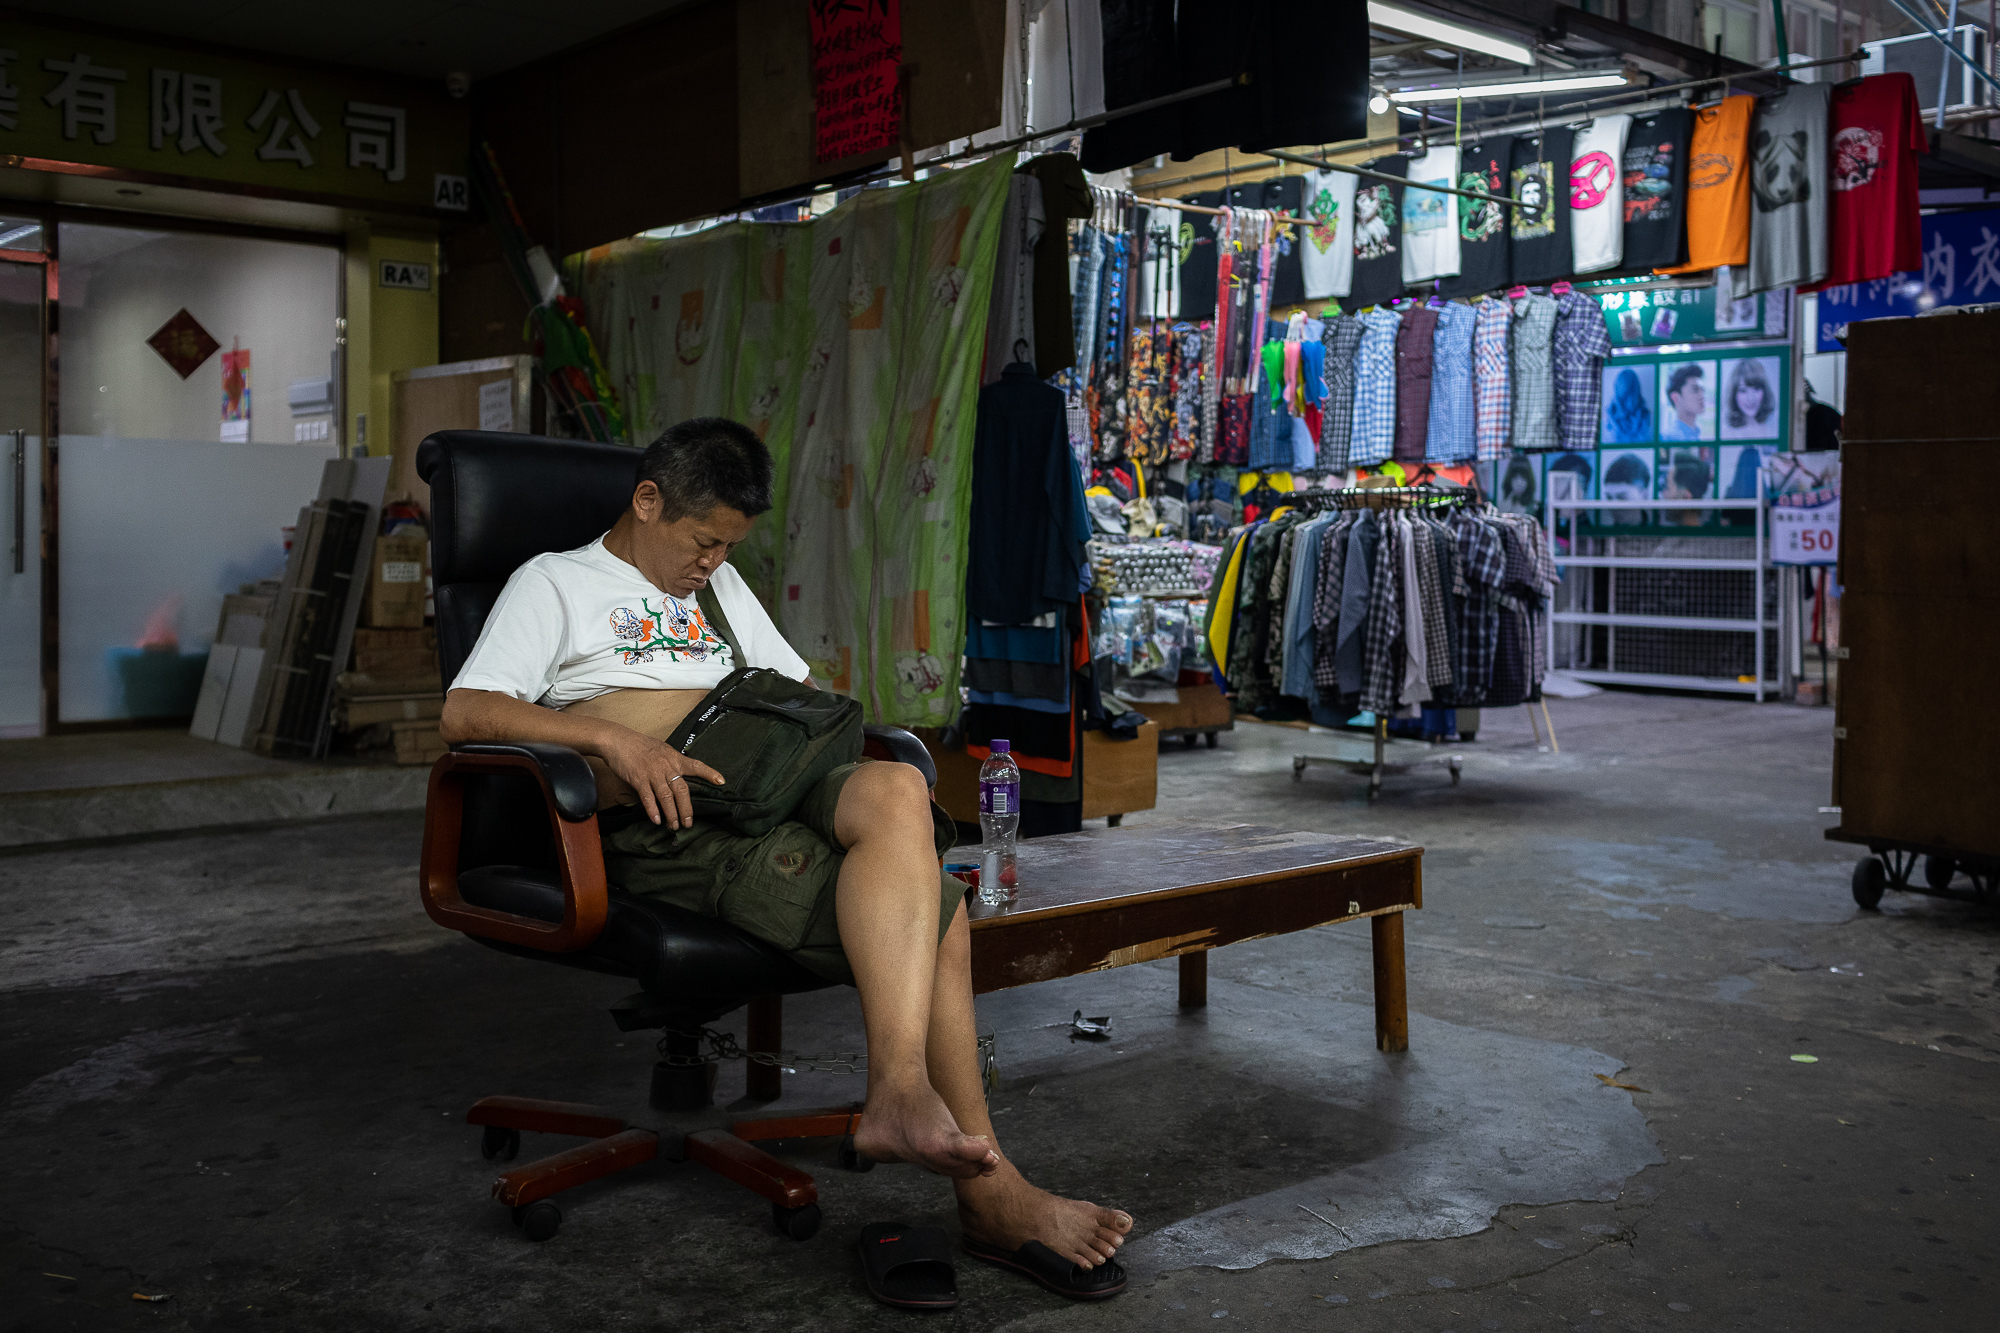 A discarded office chair makes the perfect napping spot for this man at the market in the Iao Hon neighborhood of northern Macao